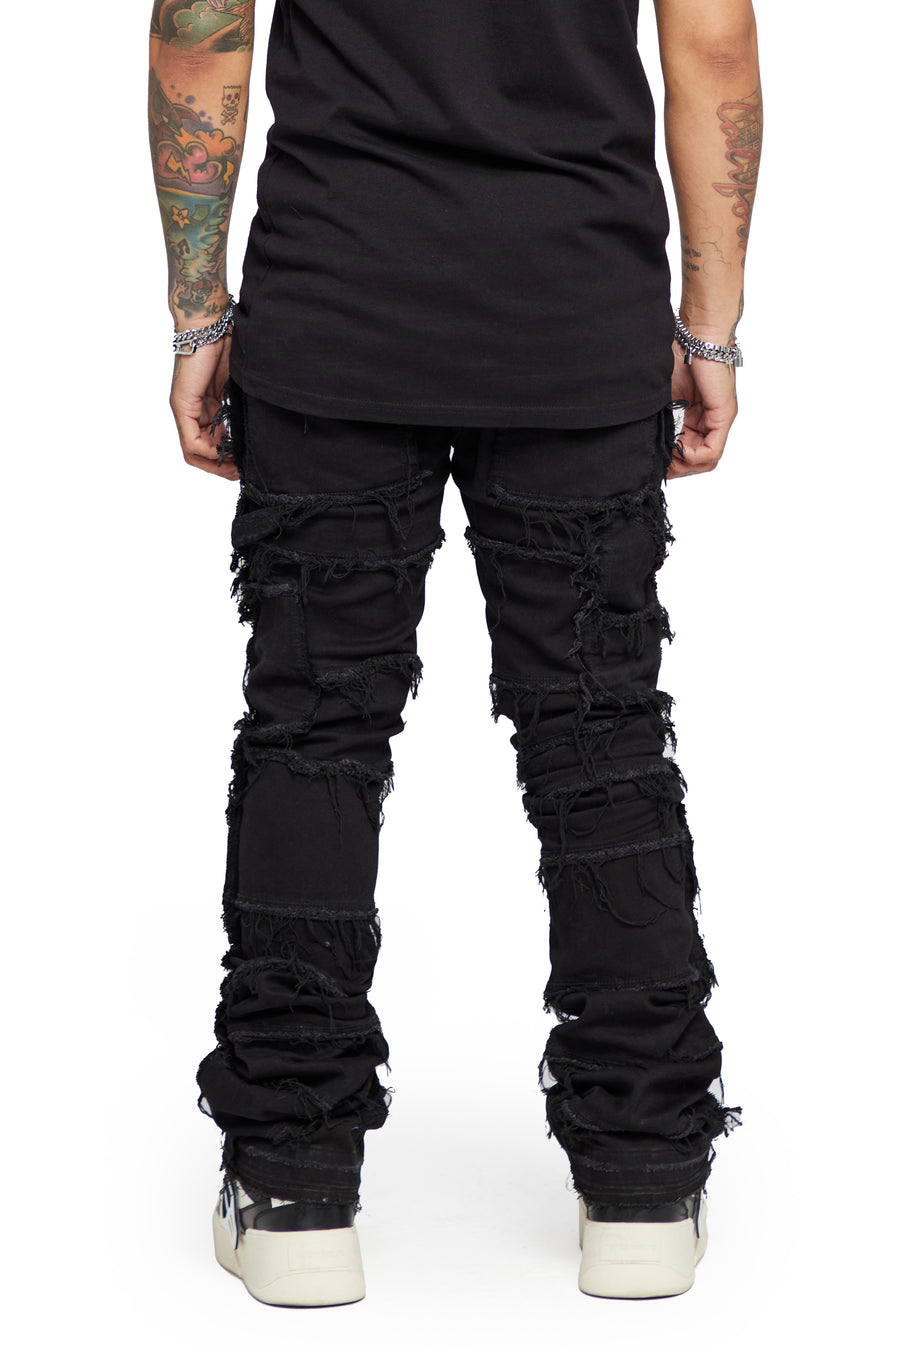 “PHOENIX 2.0” Black Washed Stacked Flare Jean